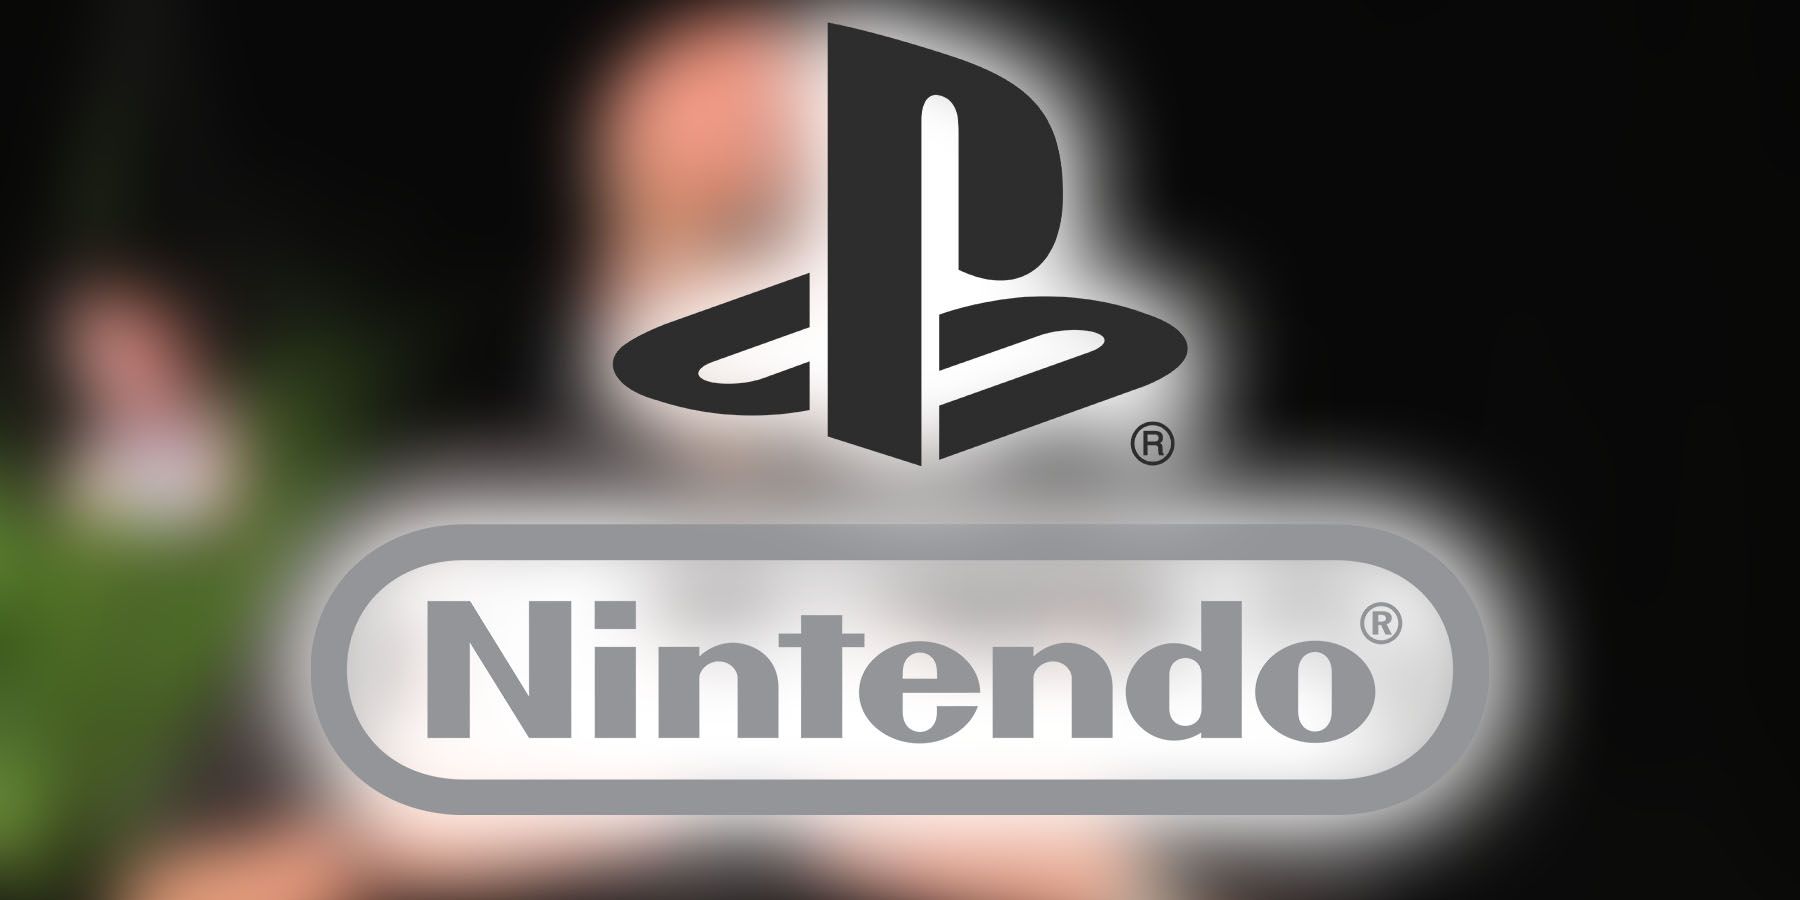 former playstation exec has joined nintendo